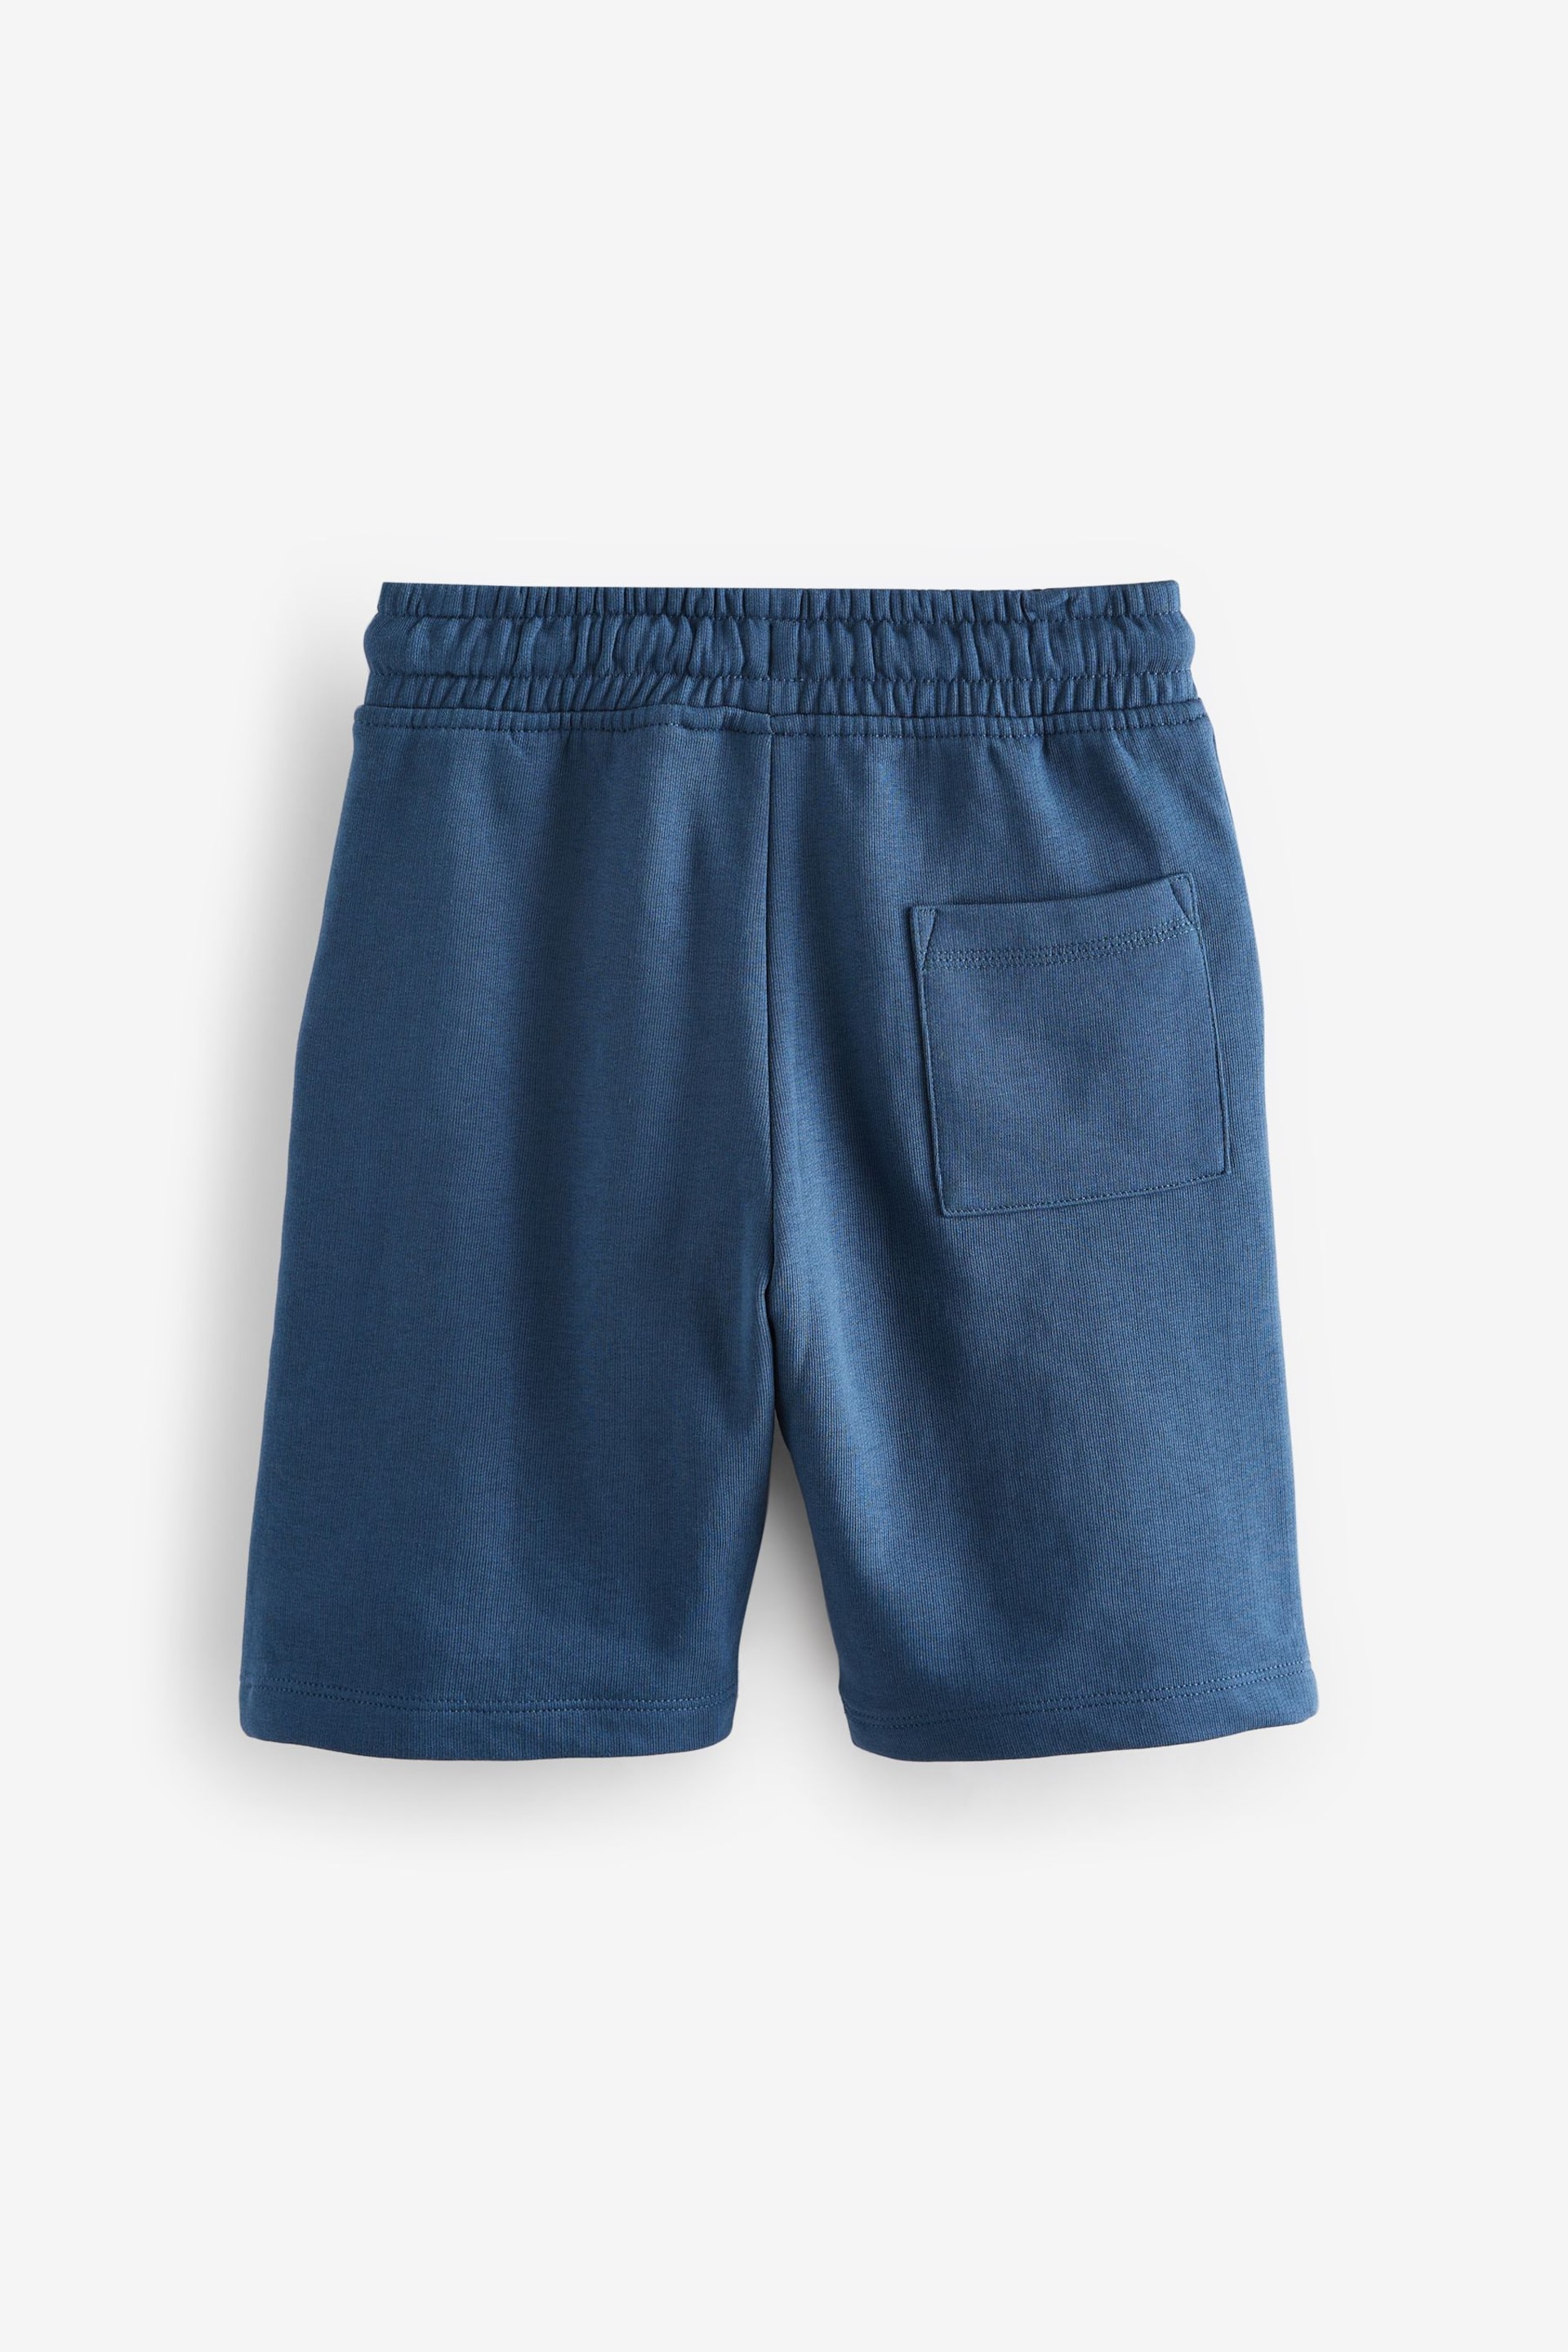 Green/Blue 2 Pack Basic Jersey Shorts (3-16yrs) - Image 2 of 3